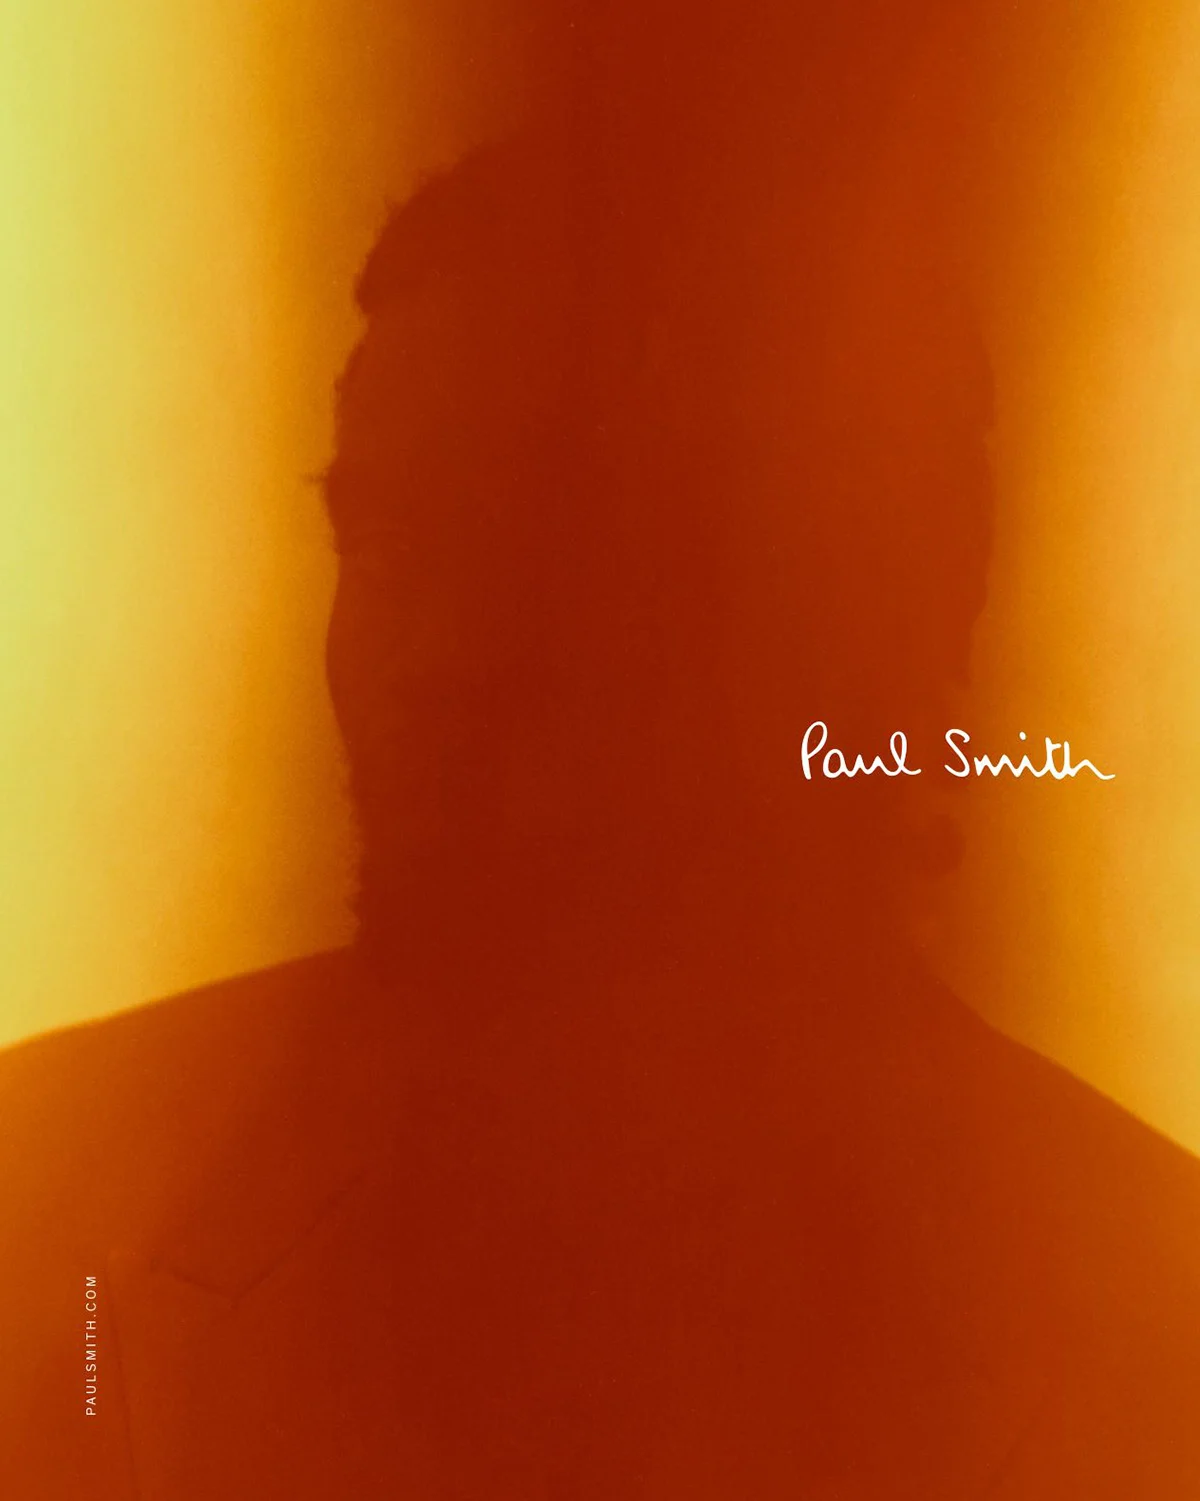 Paul Smith Spring Summer 2022 Campaign